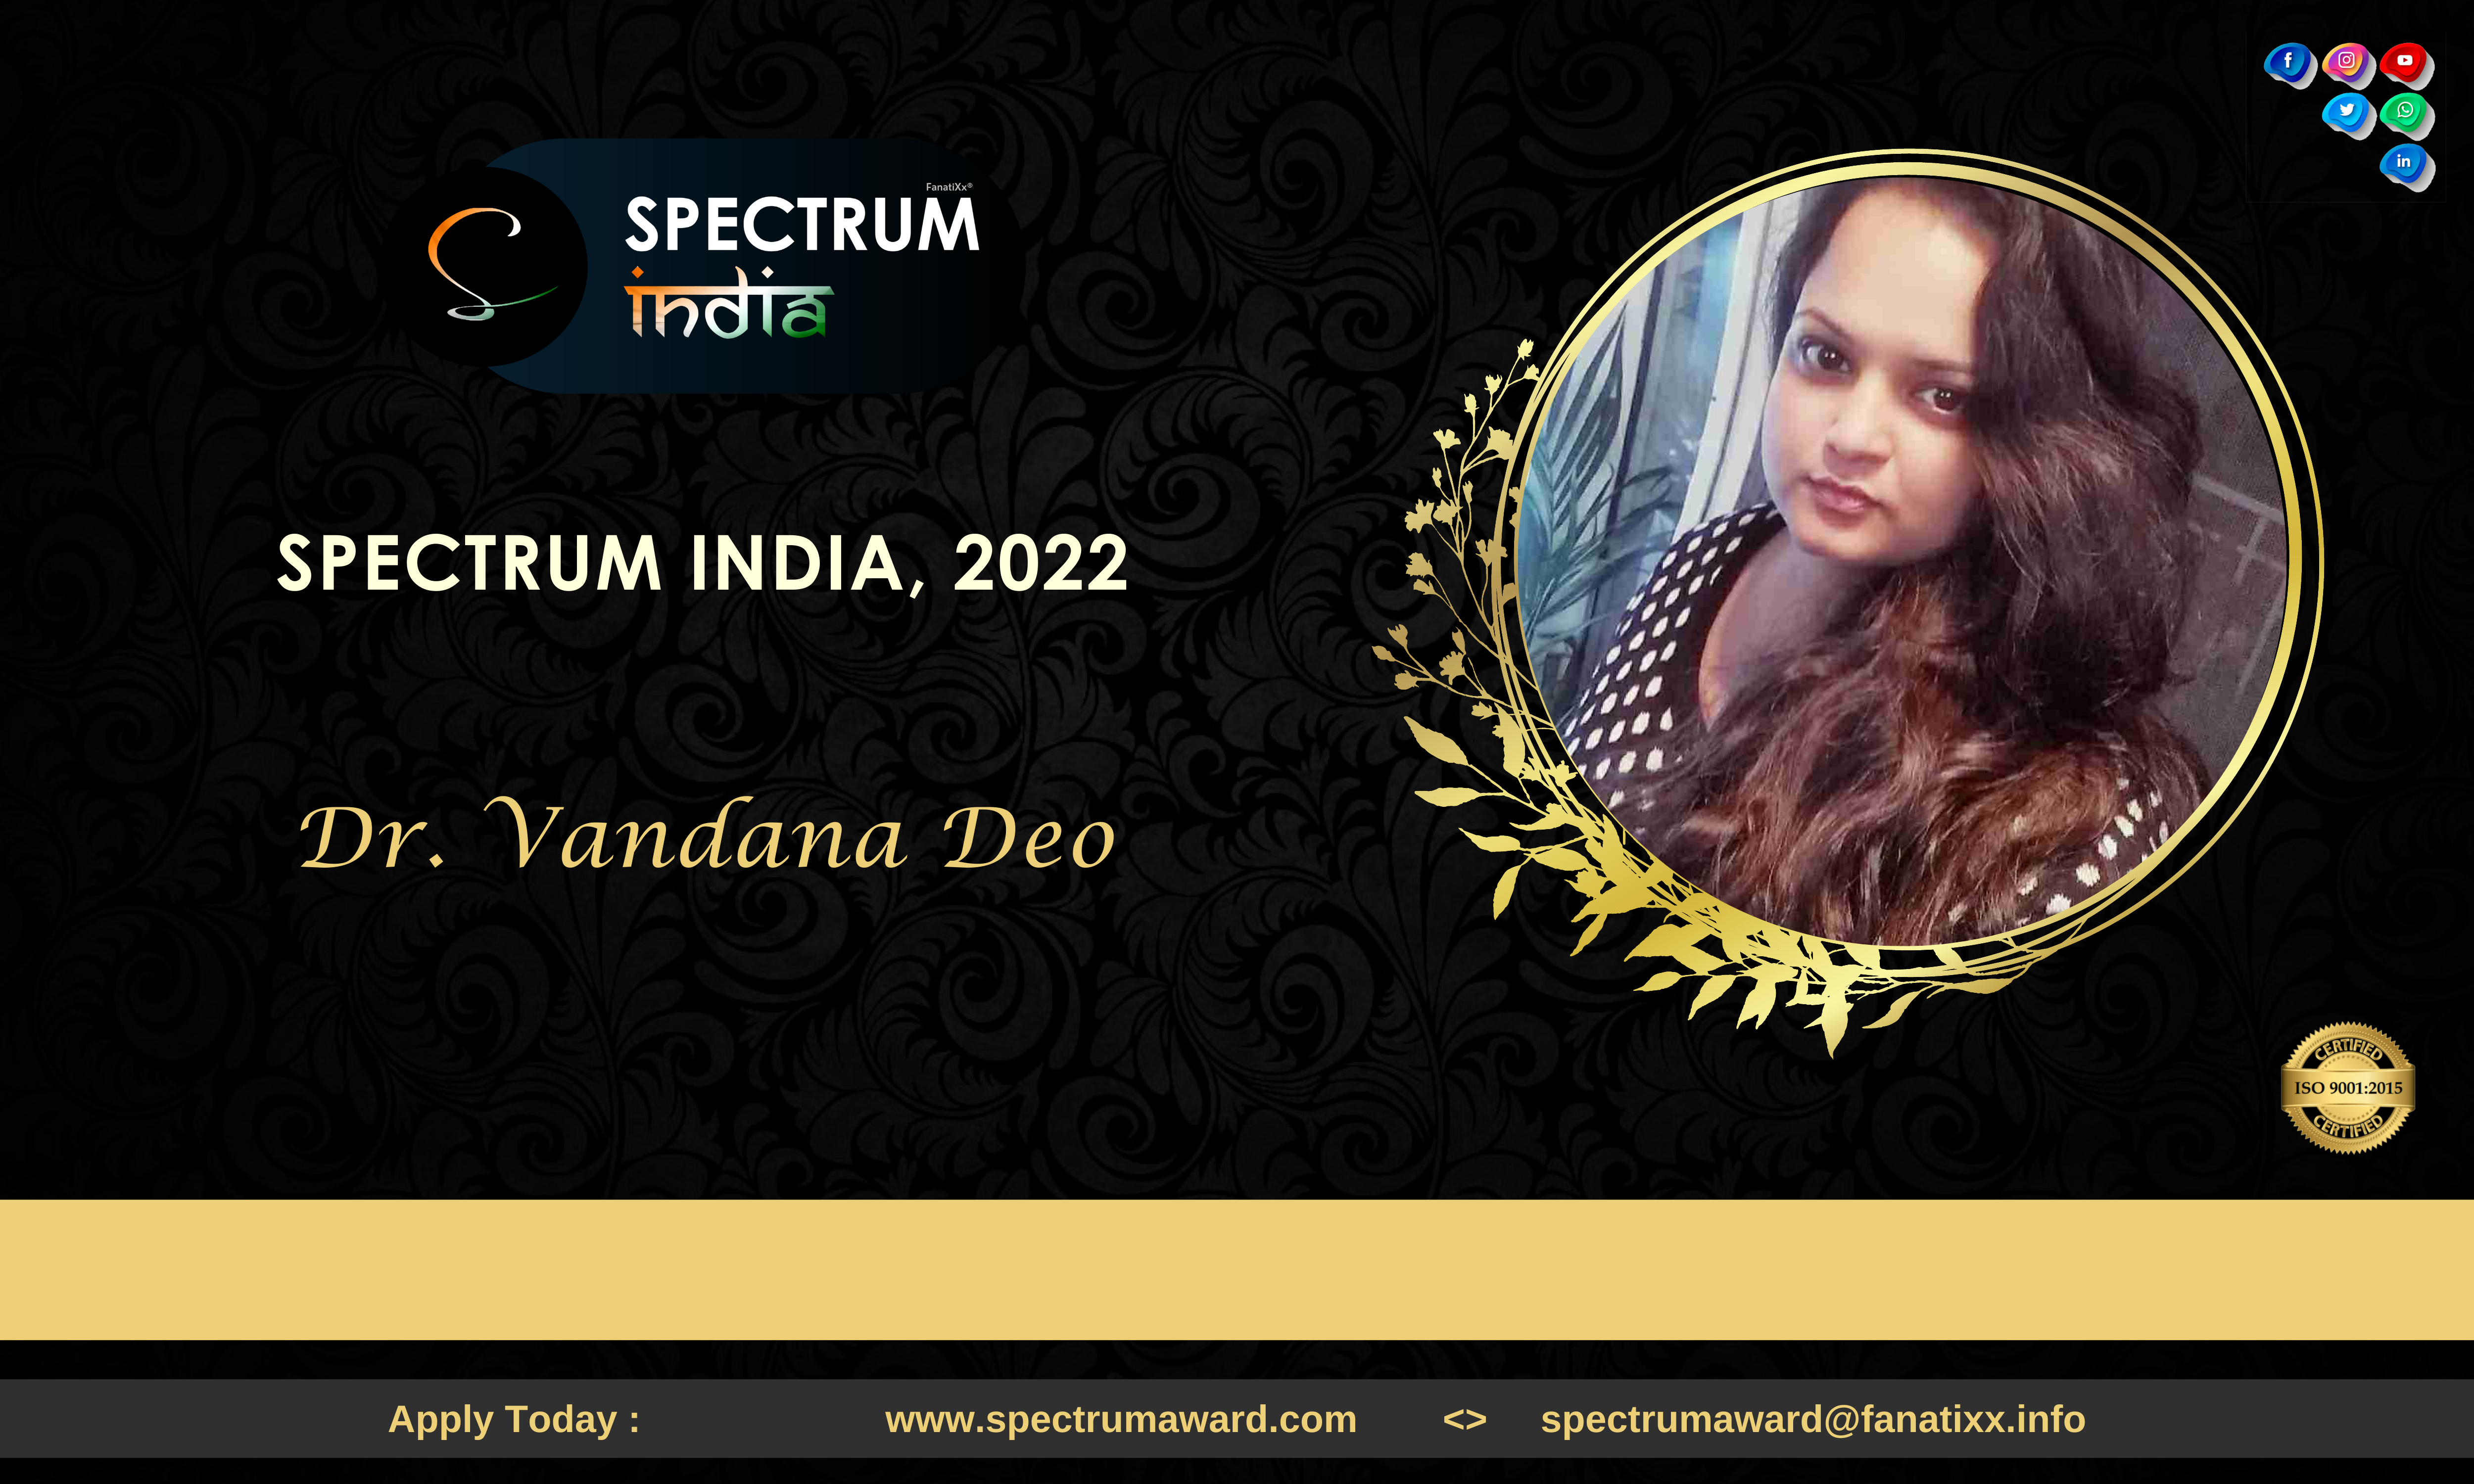 Dr.Vandana Deo, one among the Top 15 Authors, Recognized by Spectrum India 2022